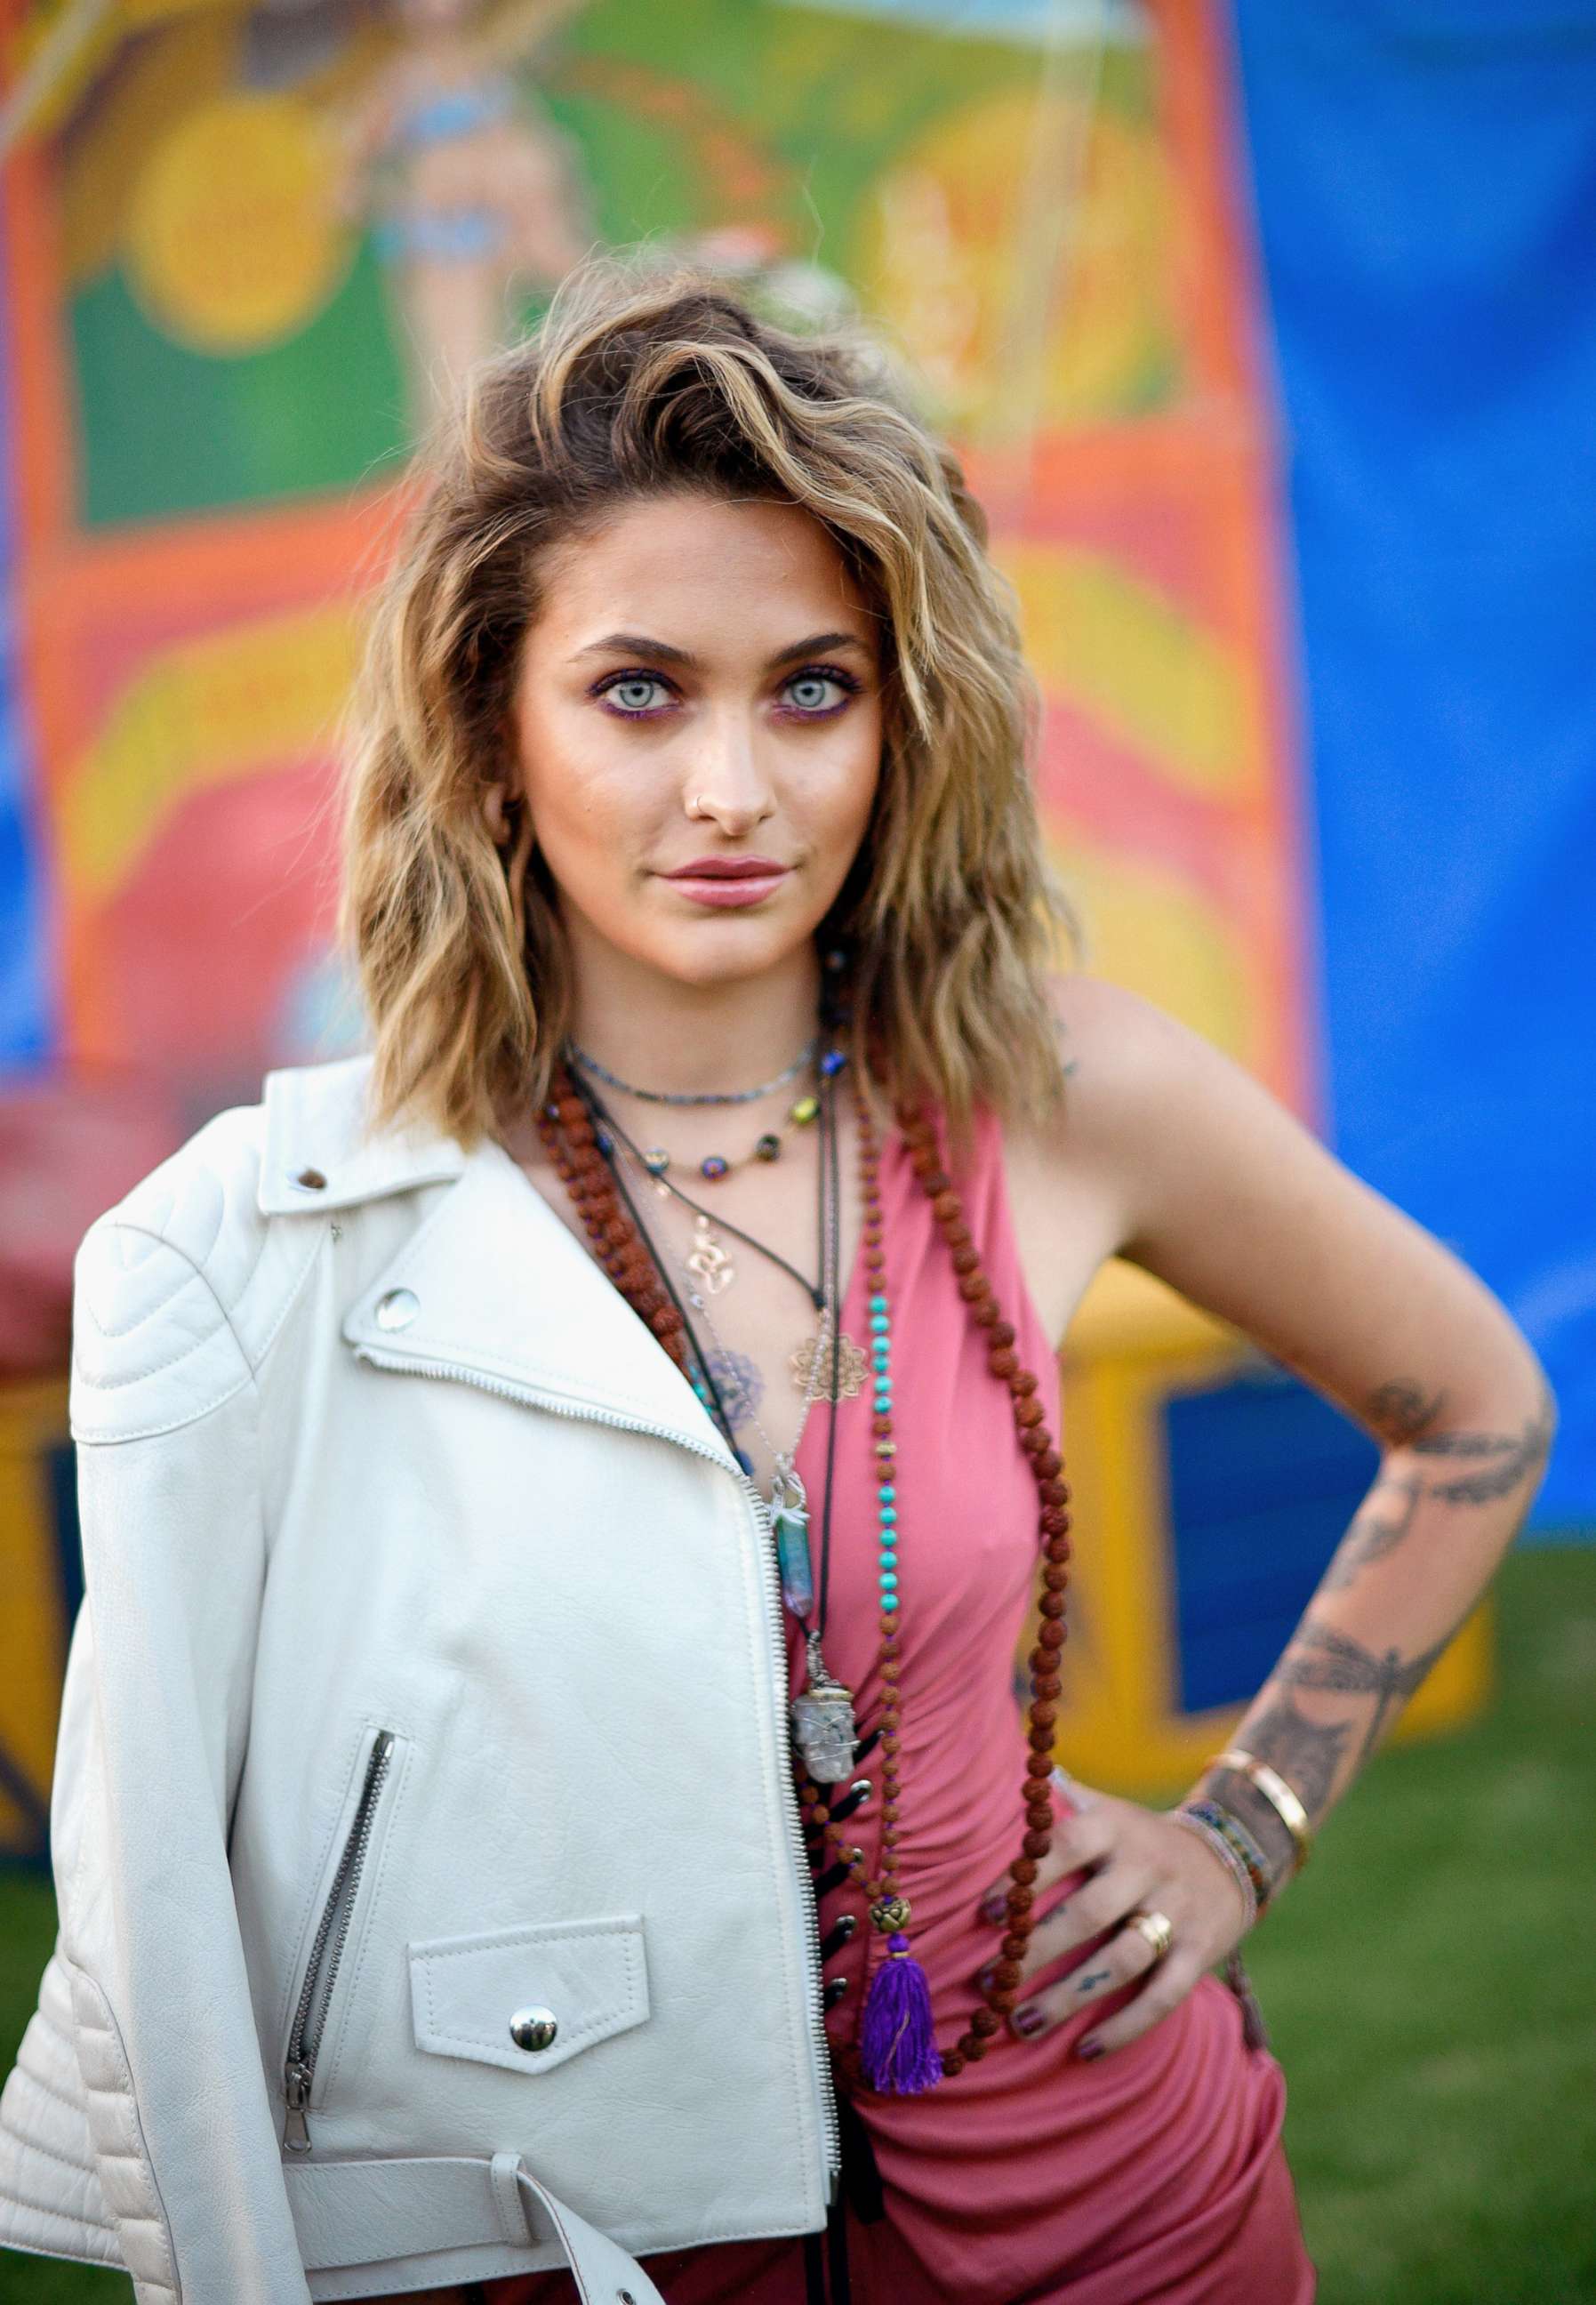 PHOTO: Paris Jackson attends an event at the Los Angeles Equestrian Center, June 8, 2018 in Burbank, Calif.